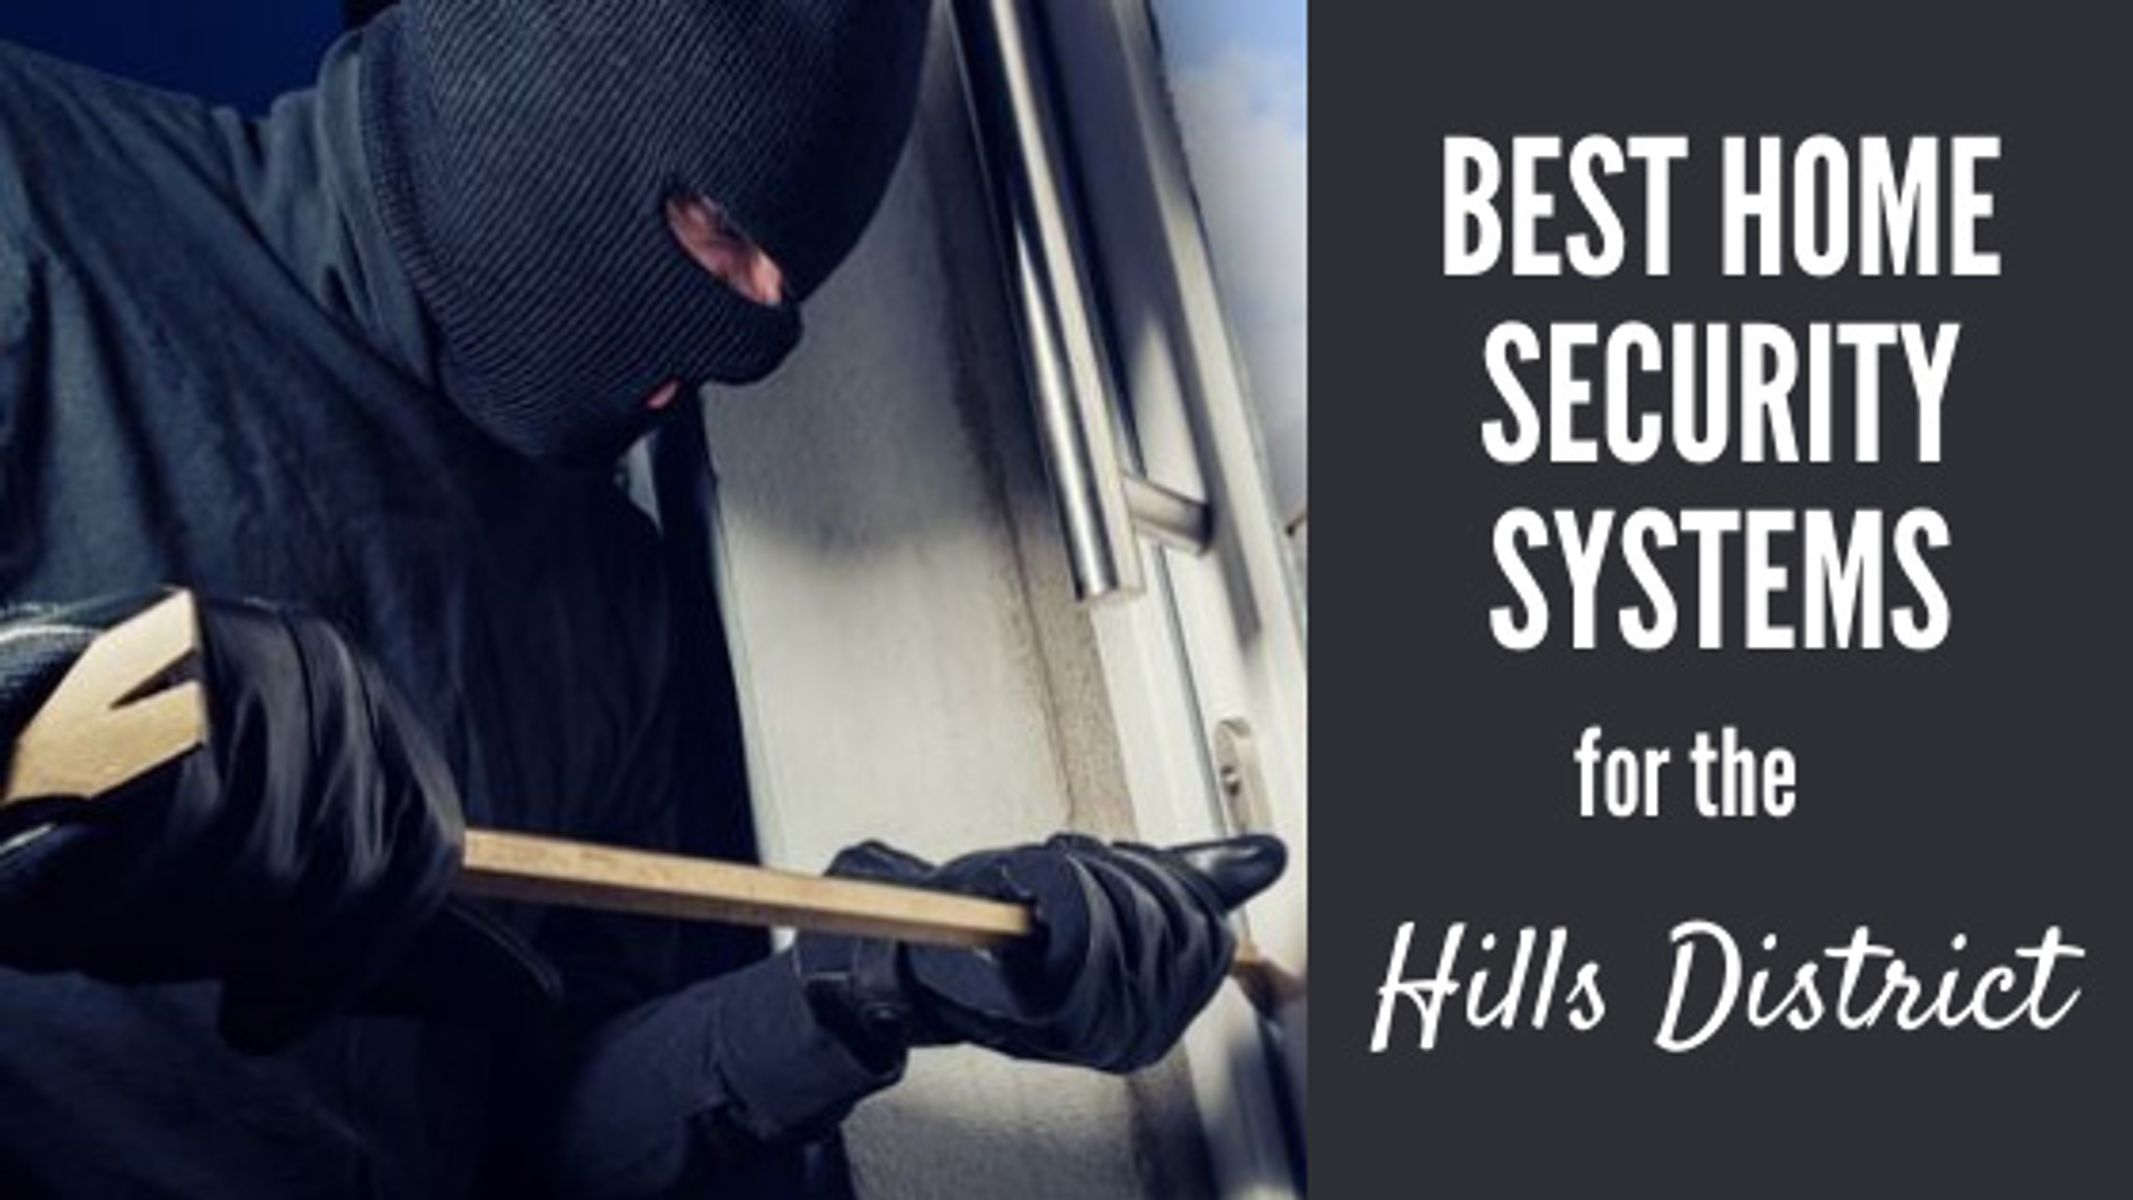 The Best Home Security Systems For Hills District Homes